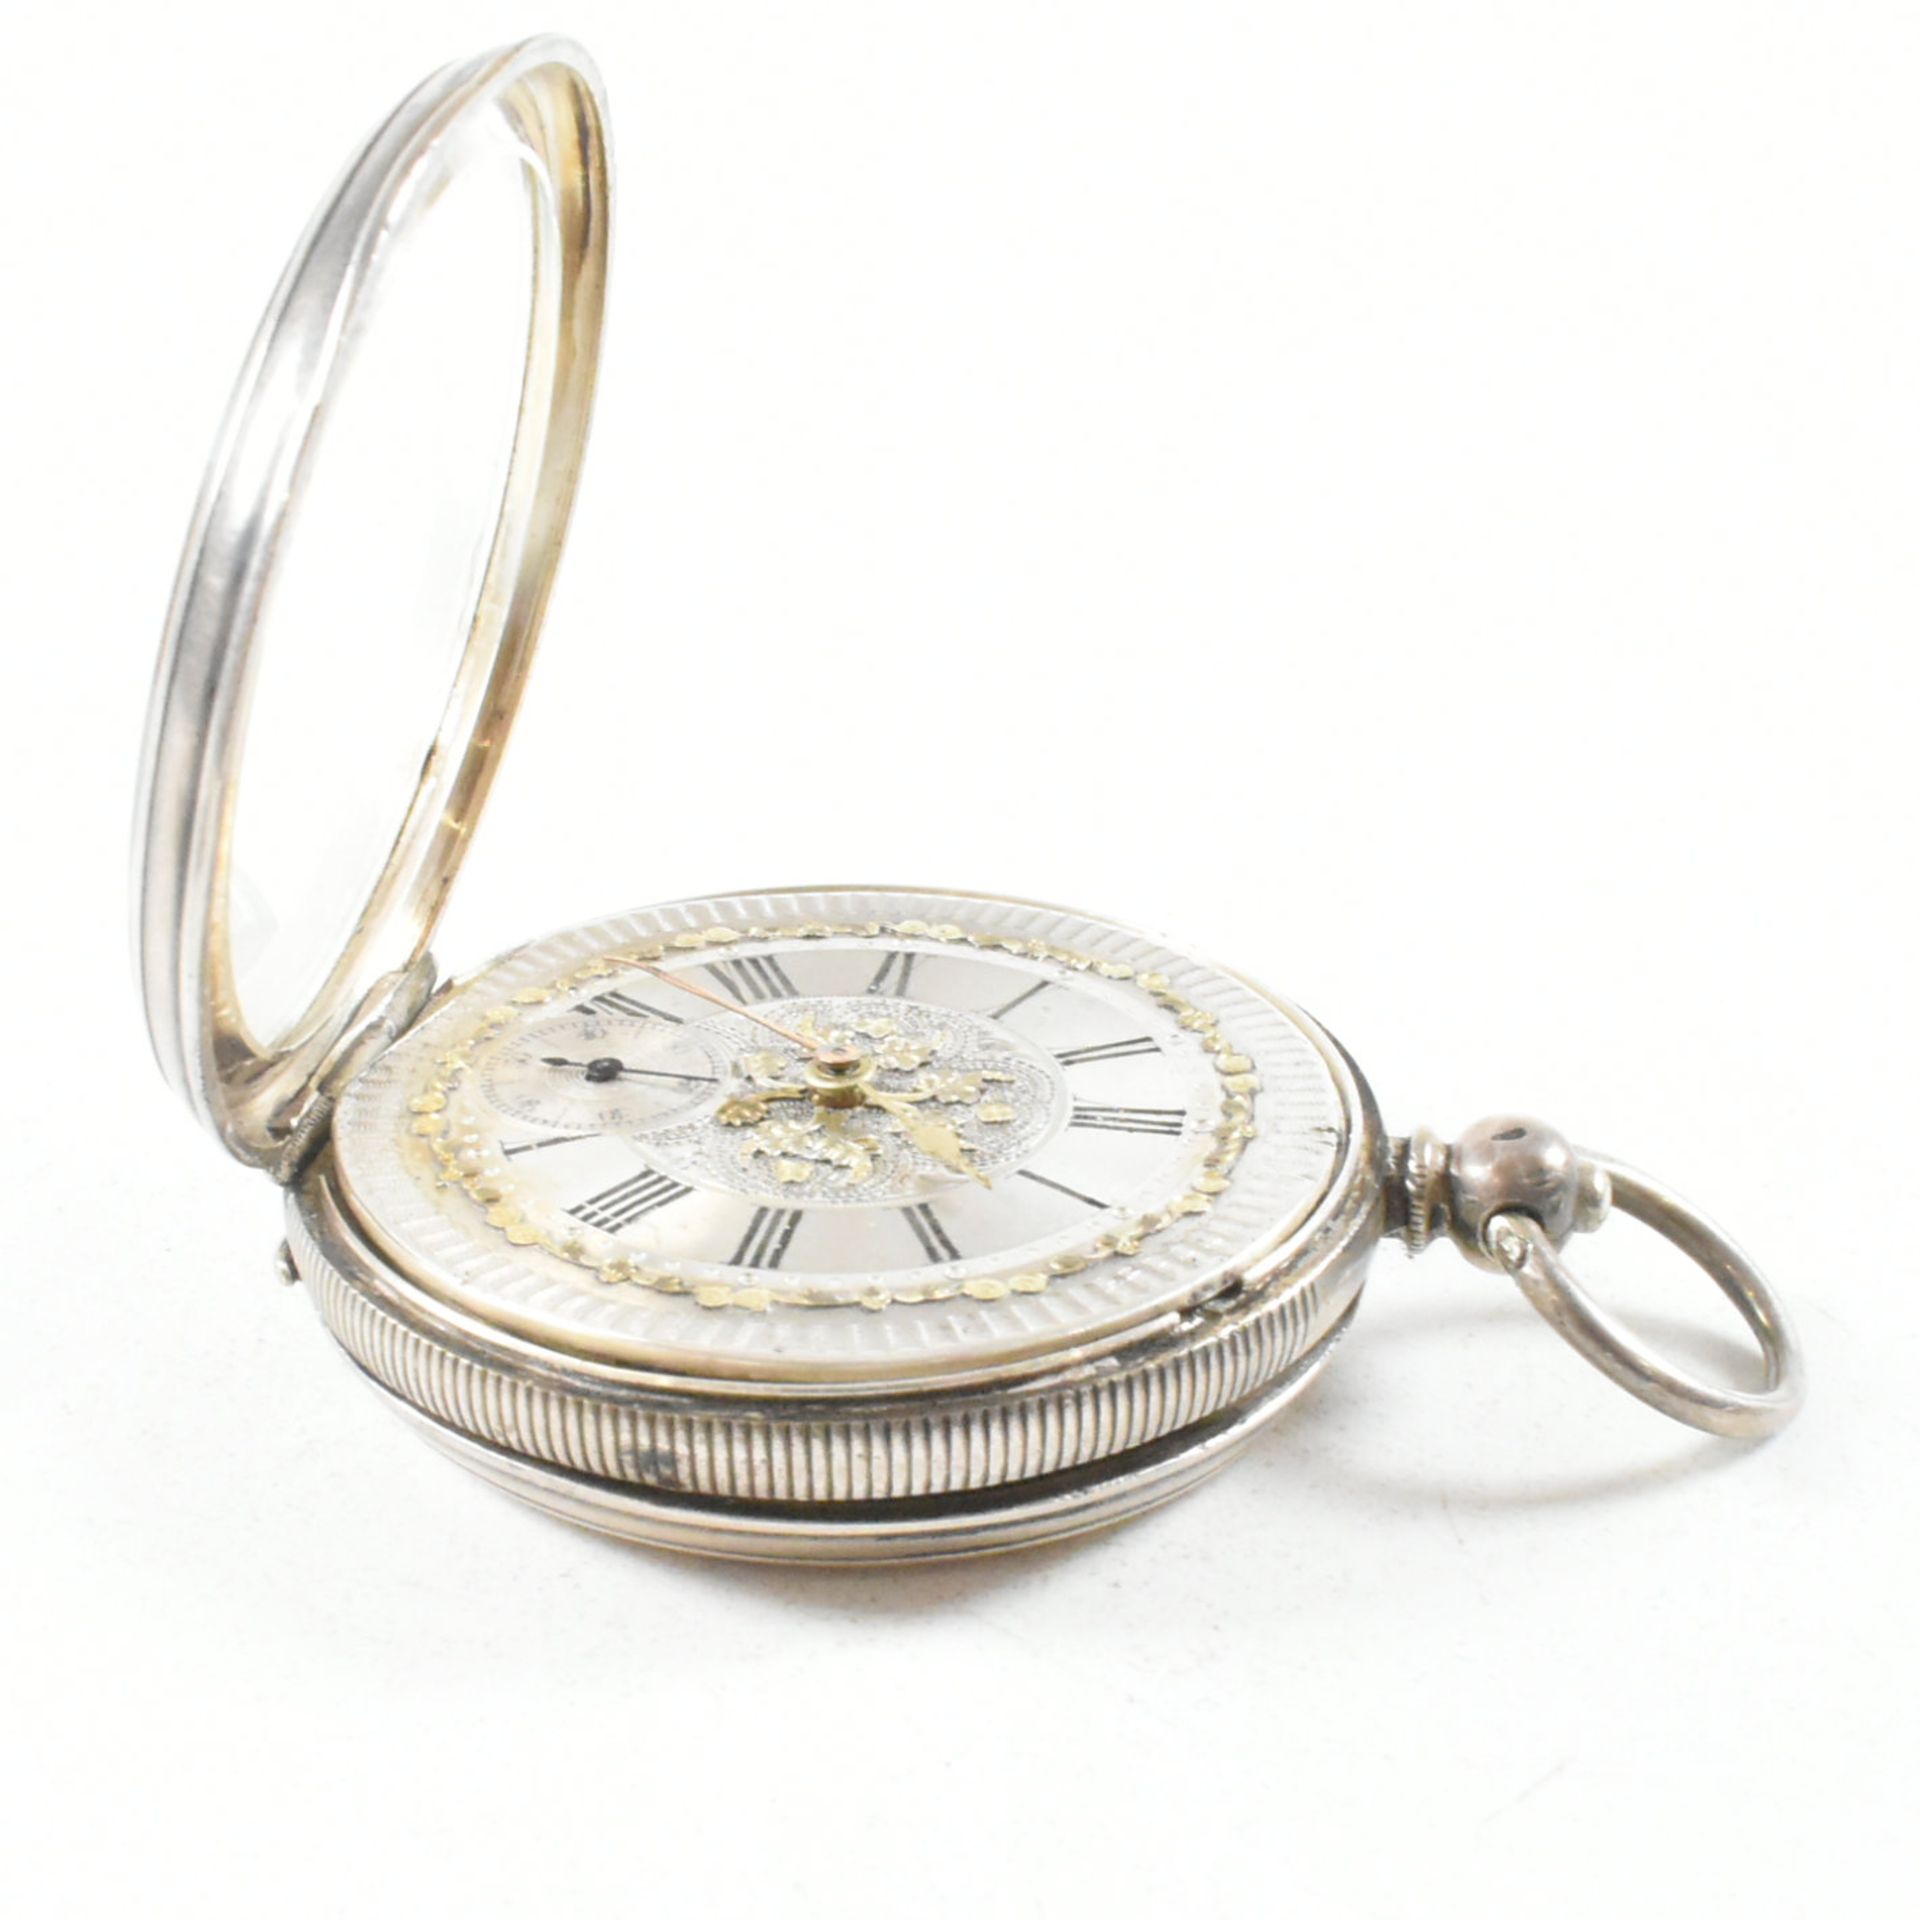 TWO EARLY 2OTH CENTURY SILVER POCKET WATCHES - Image 7 of 7